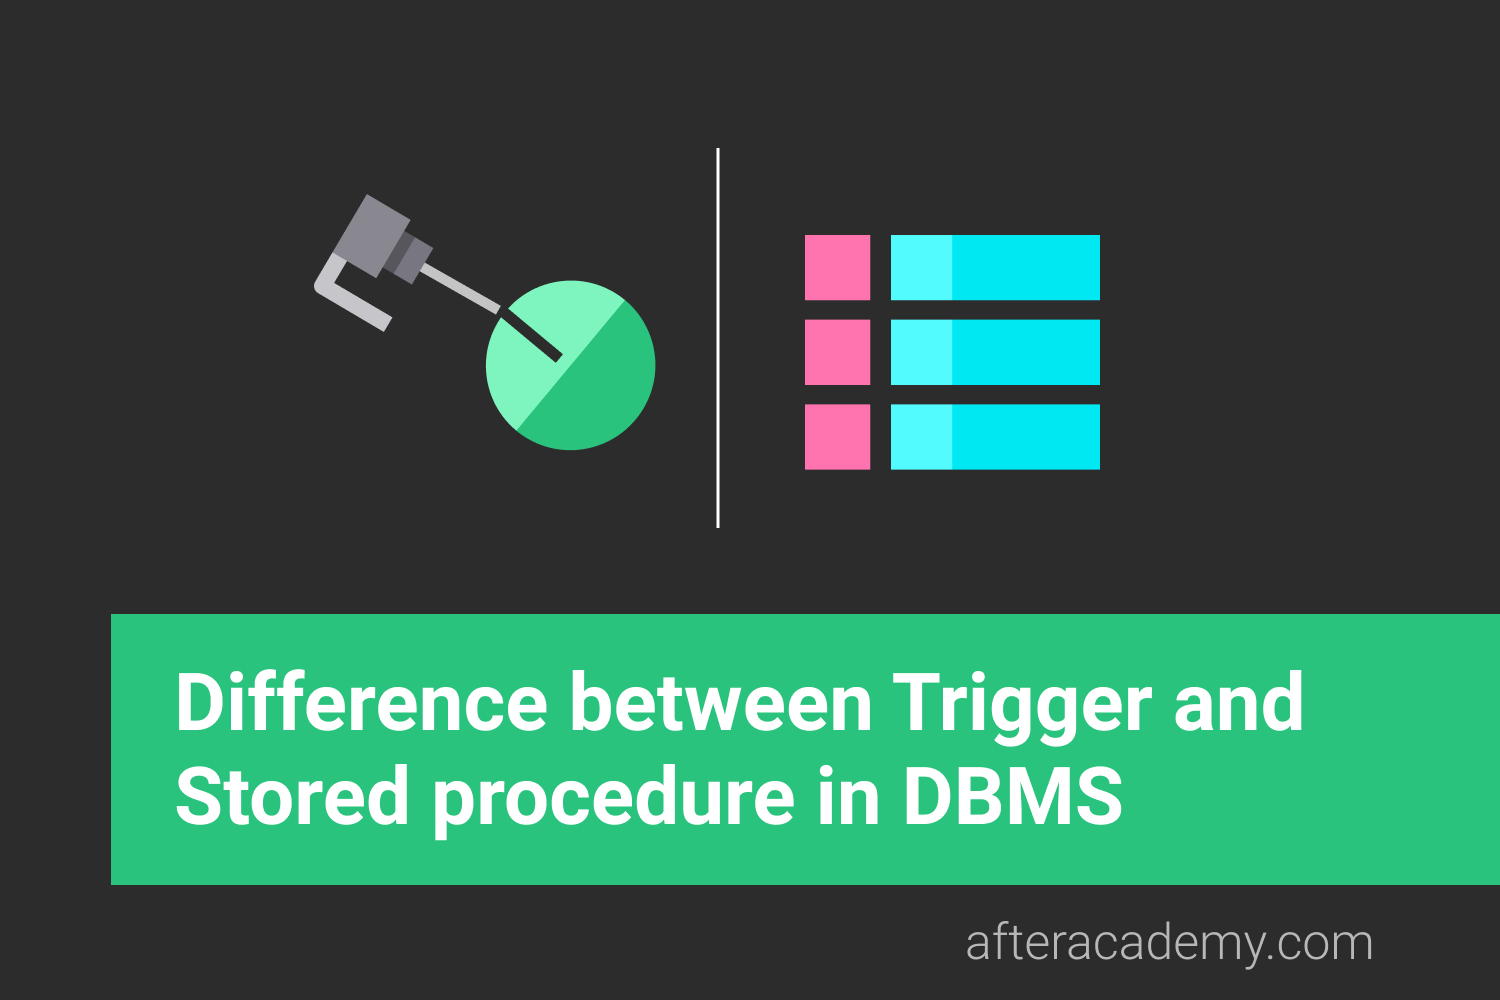 Difference between Trigger and Stored procedure in DBMS